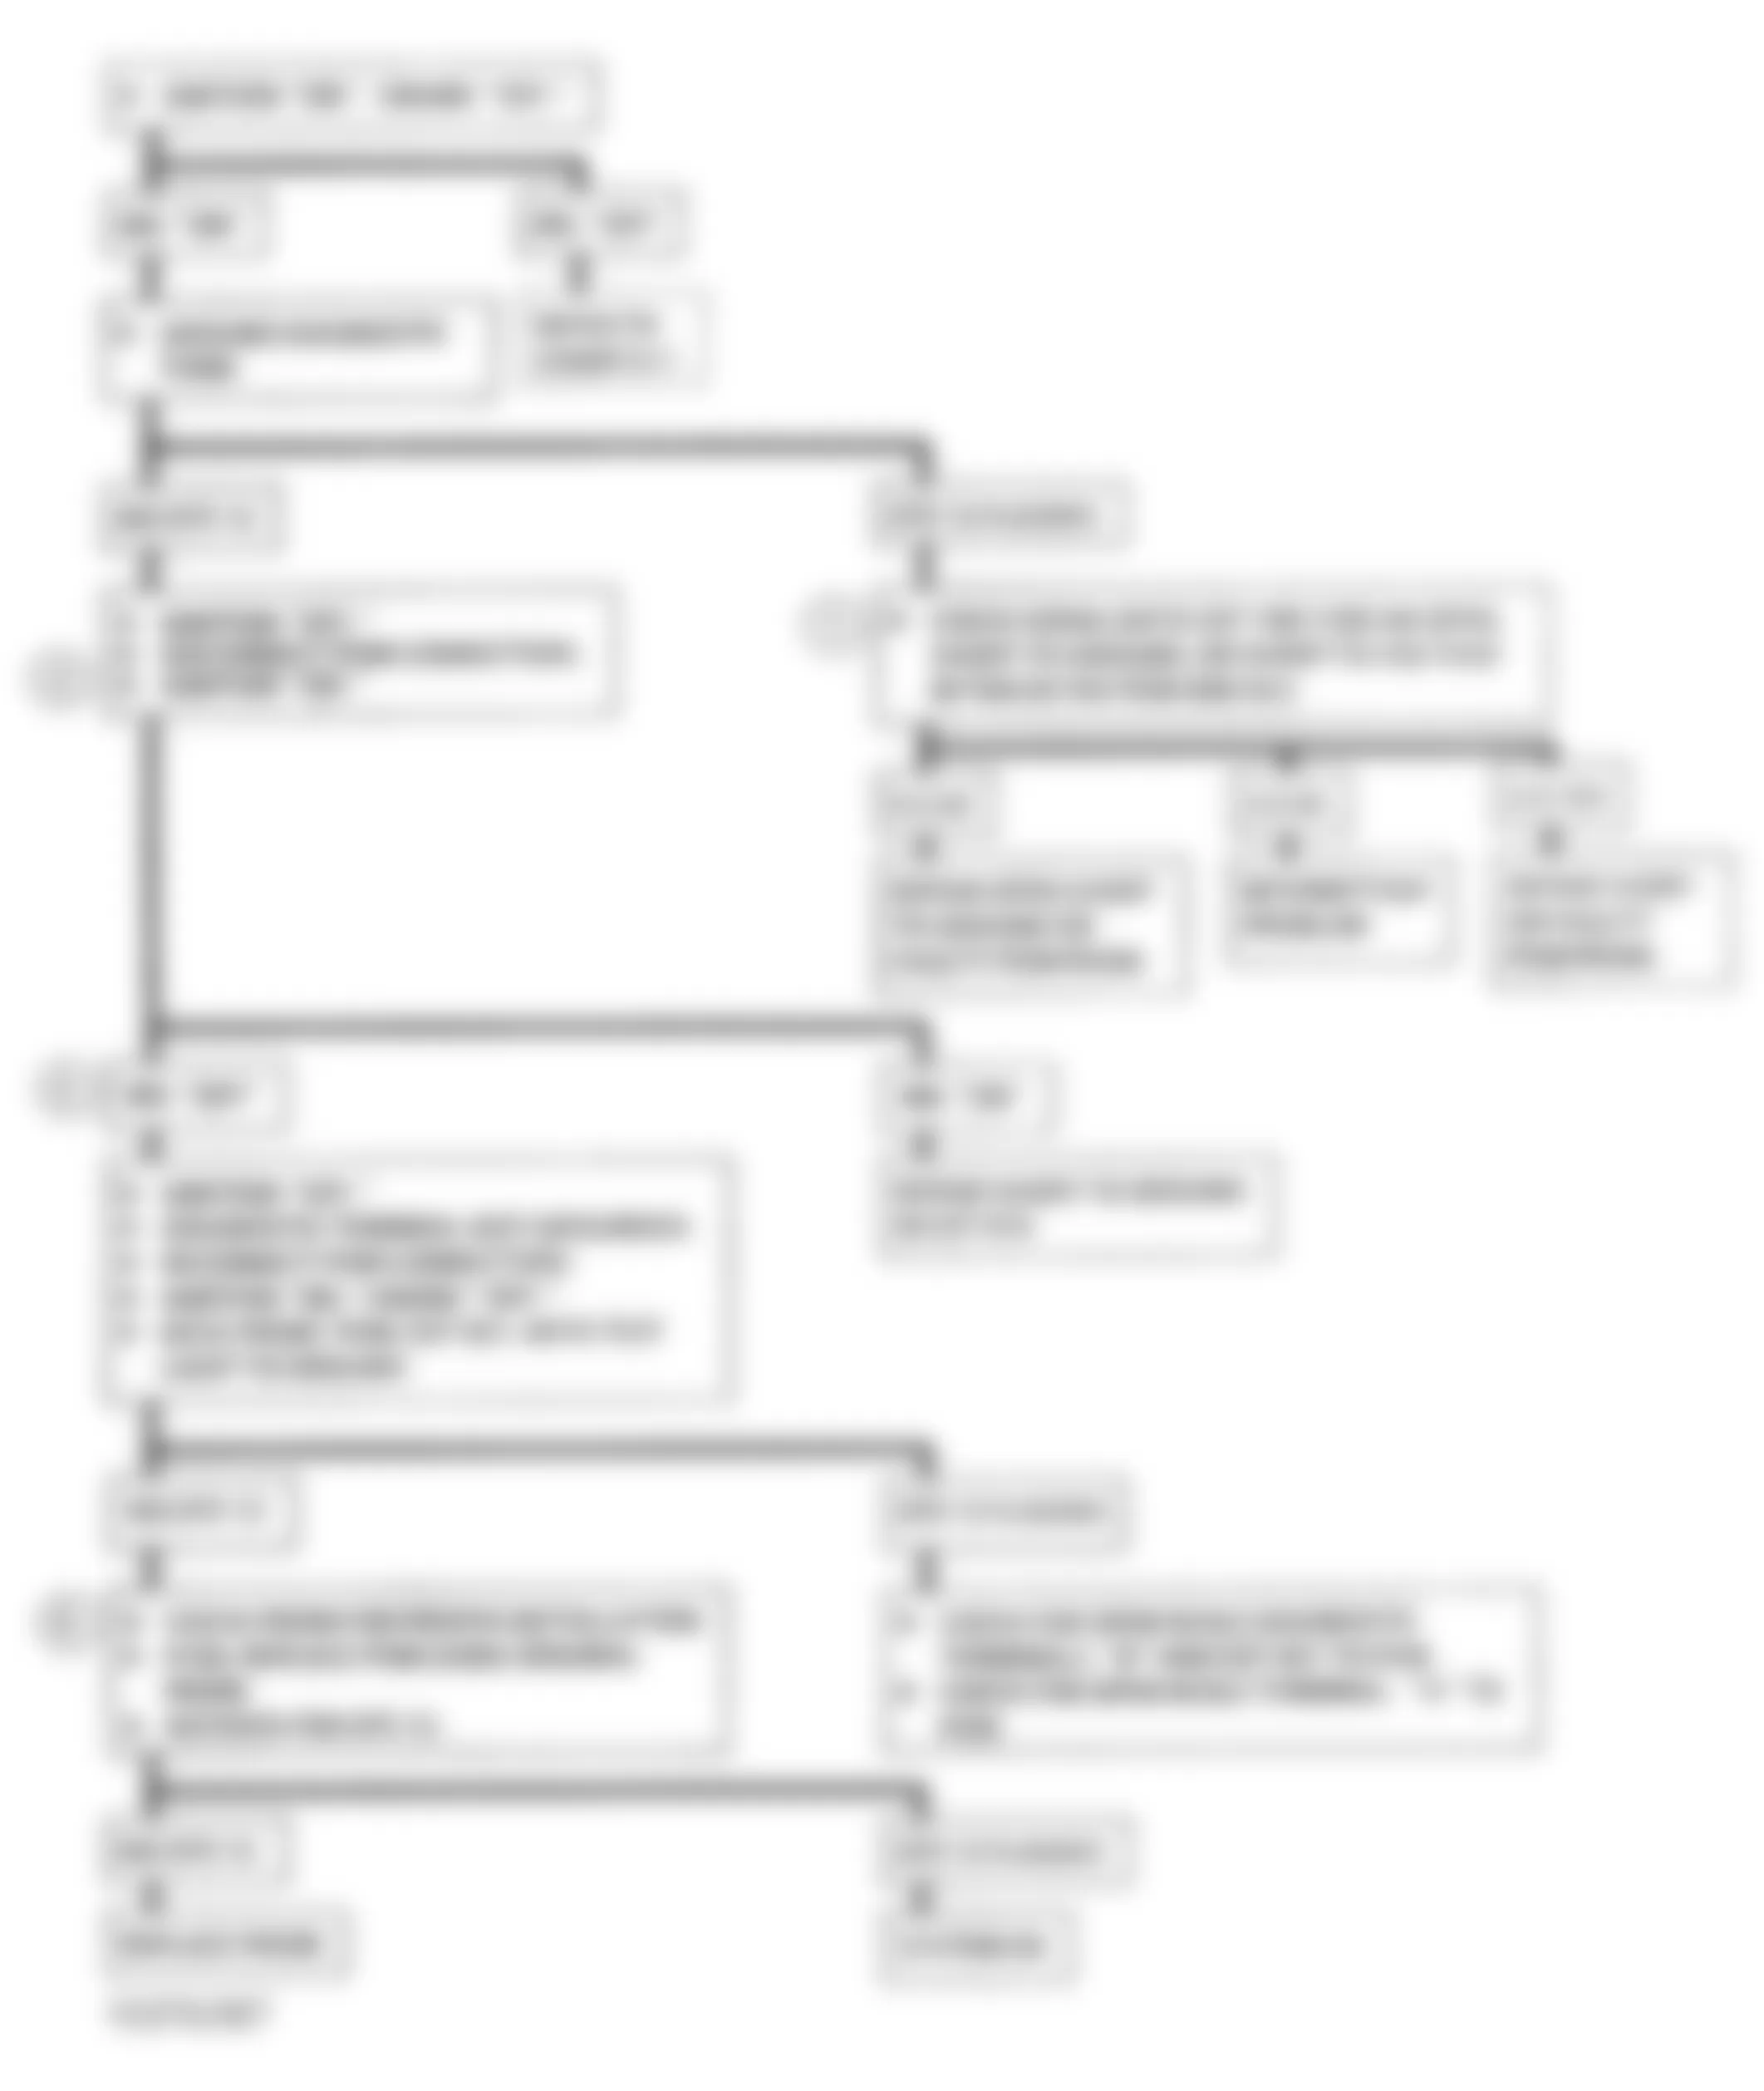 Chevrolet Pickup K1500 1993 - Component Locations -  A-2, Flowchart, No DLC Data, MIL On All Time - A/T